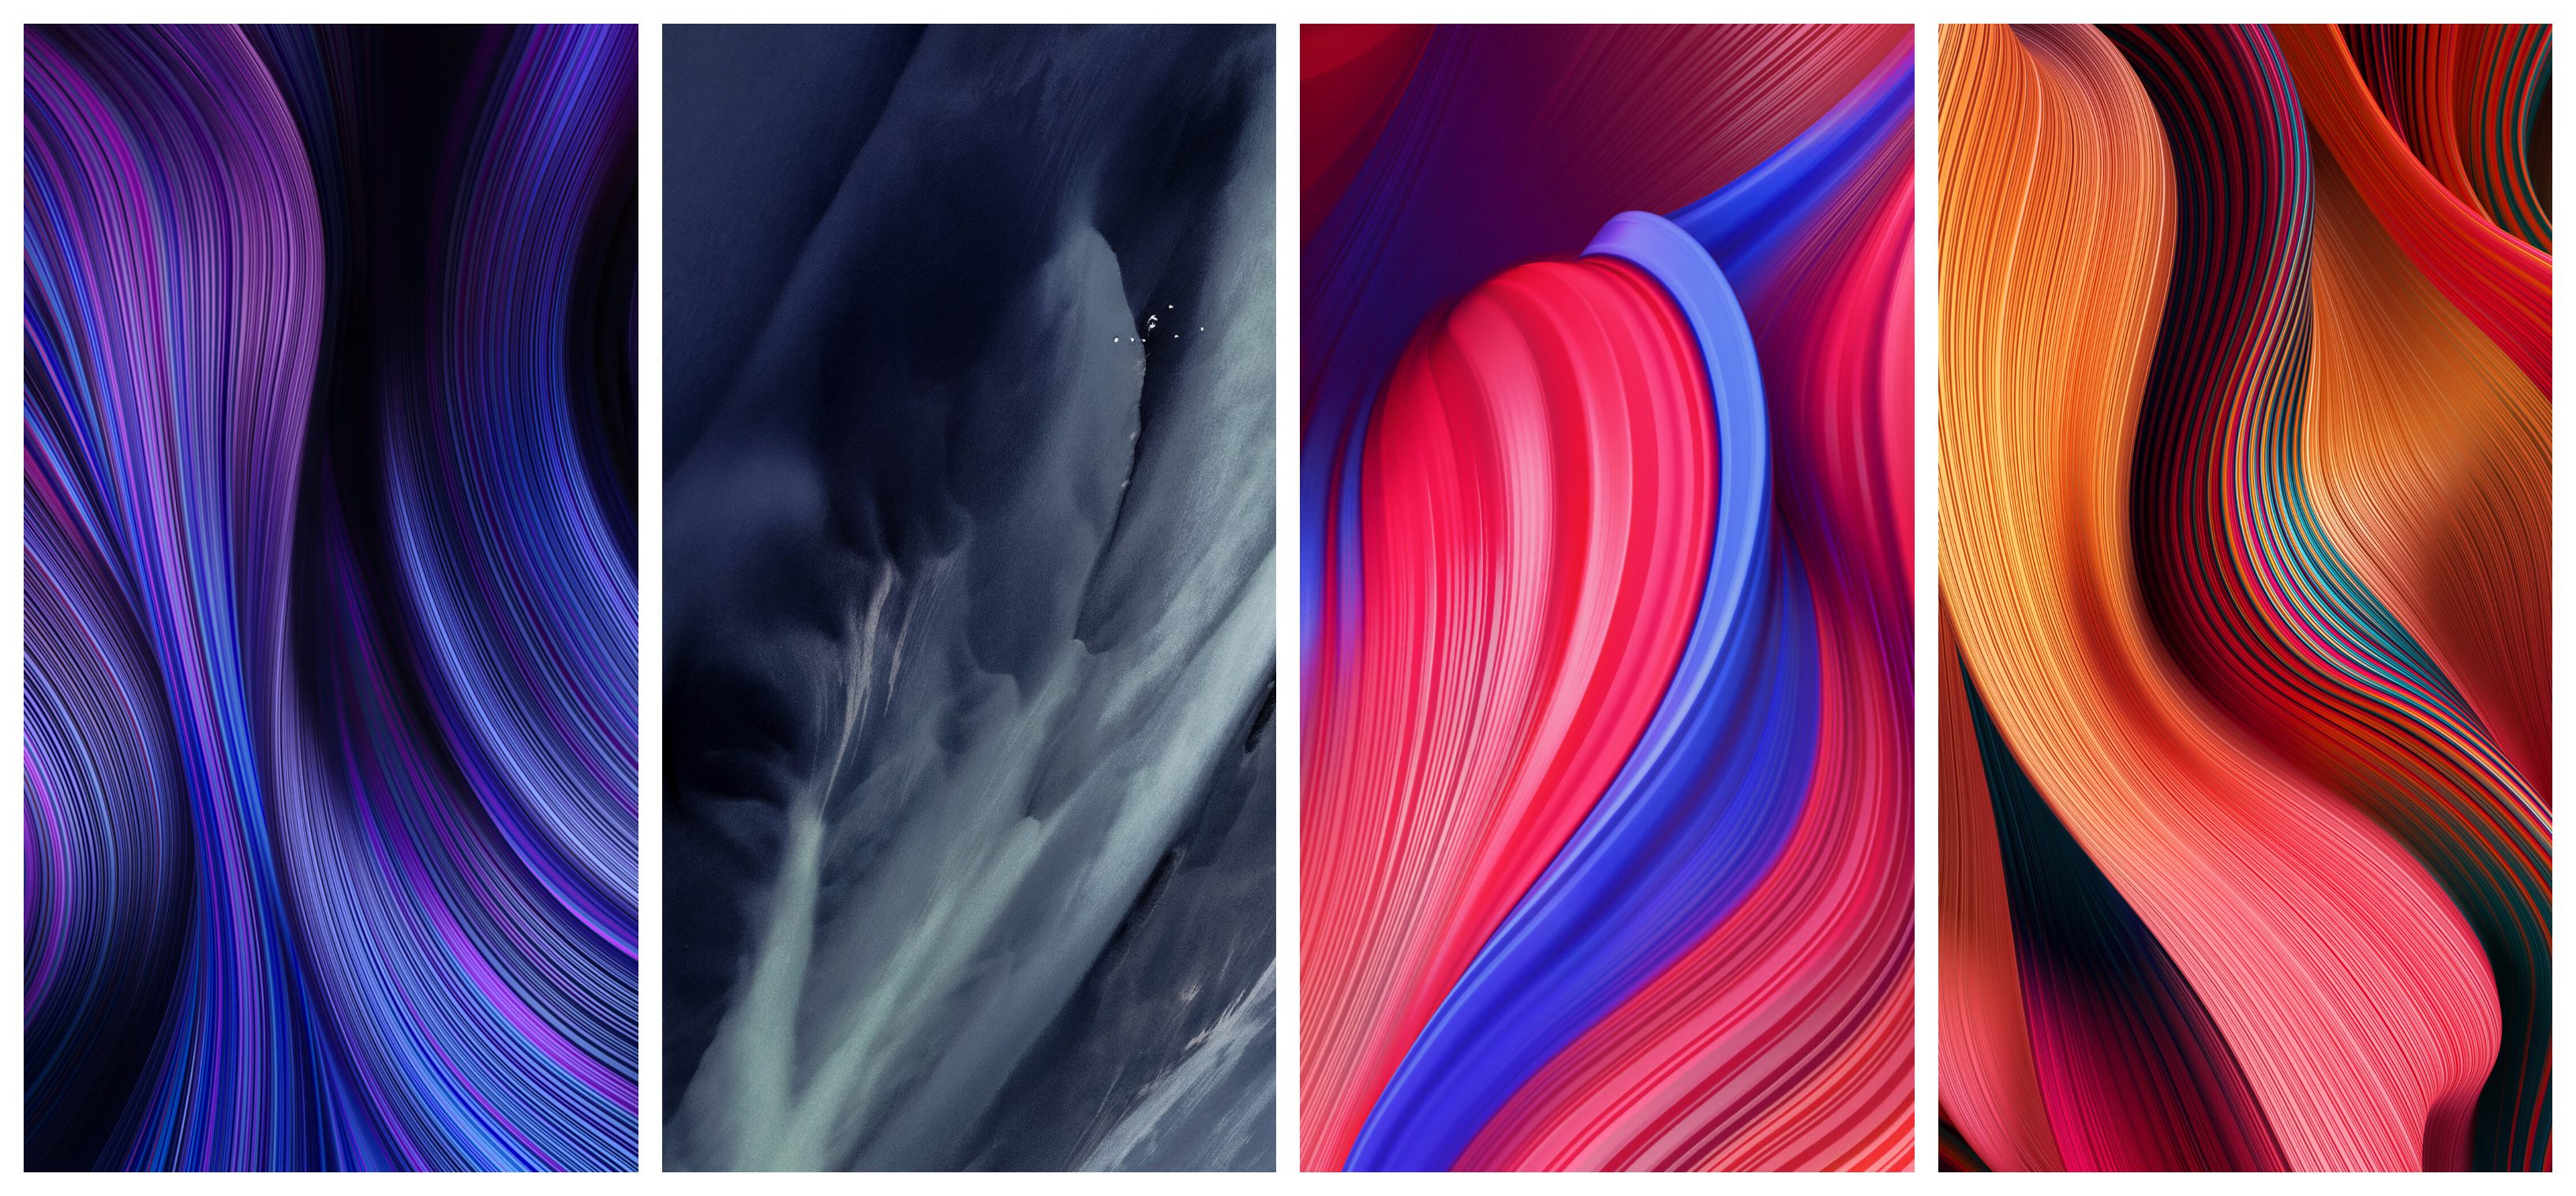 Download Miui 11 Stock Wallpapers Zip File Included - Wire - 3264x1515  Wallpaper 